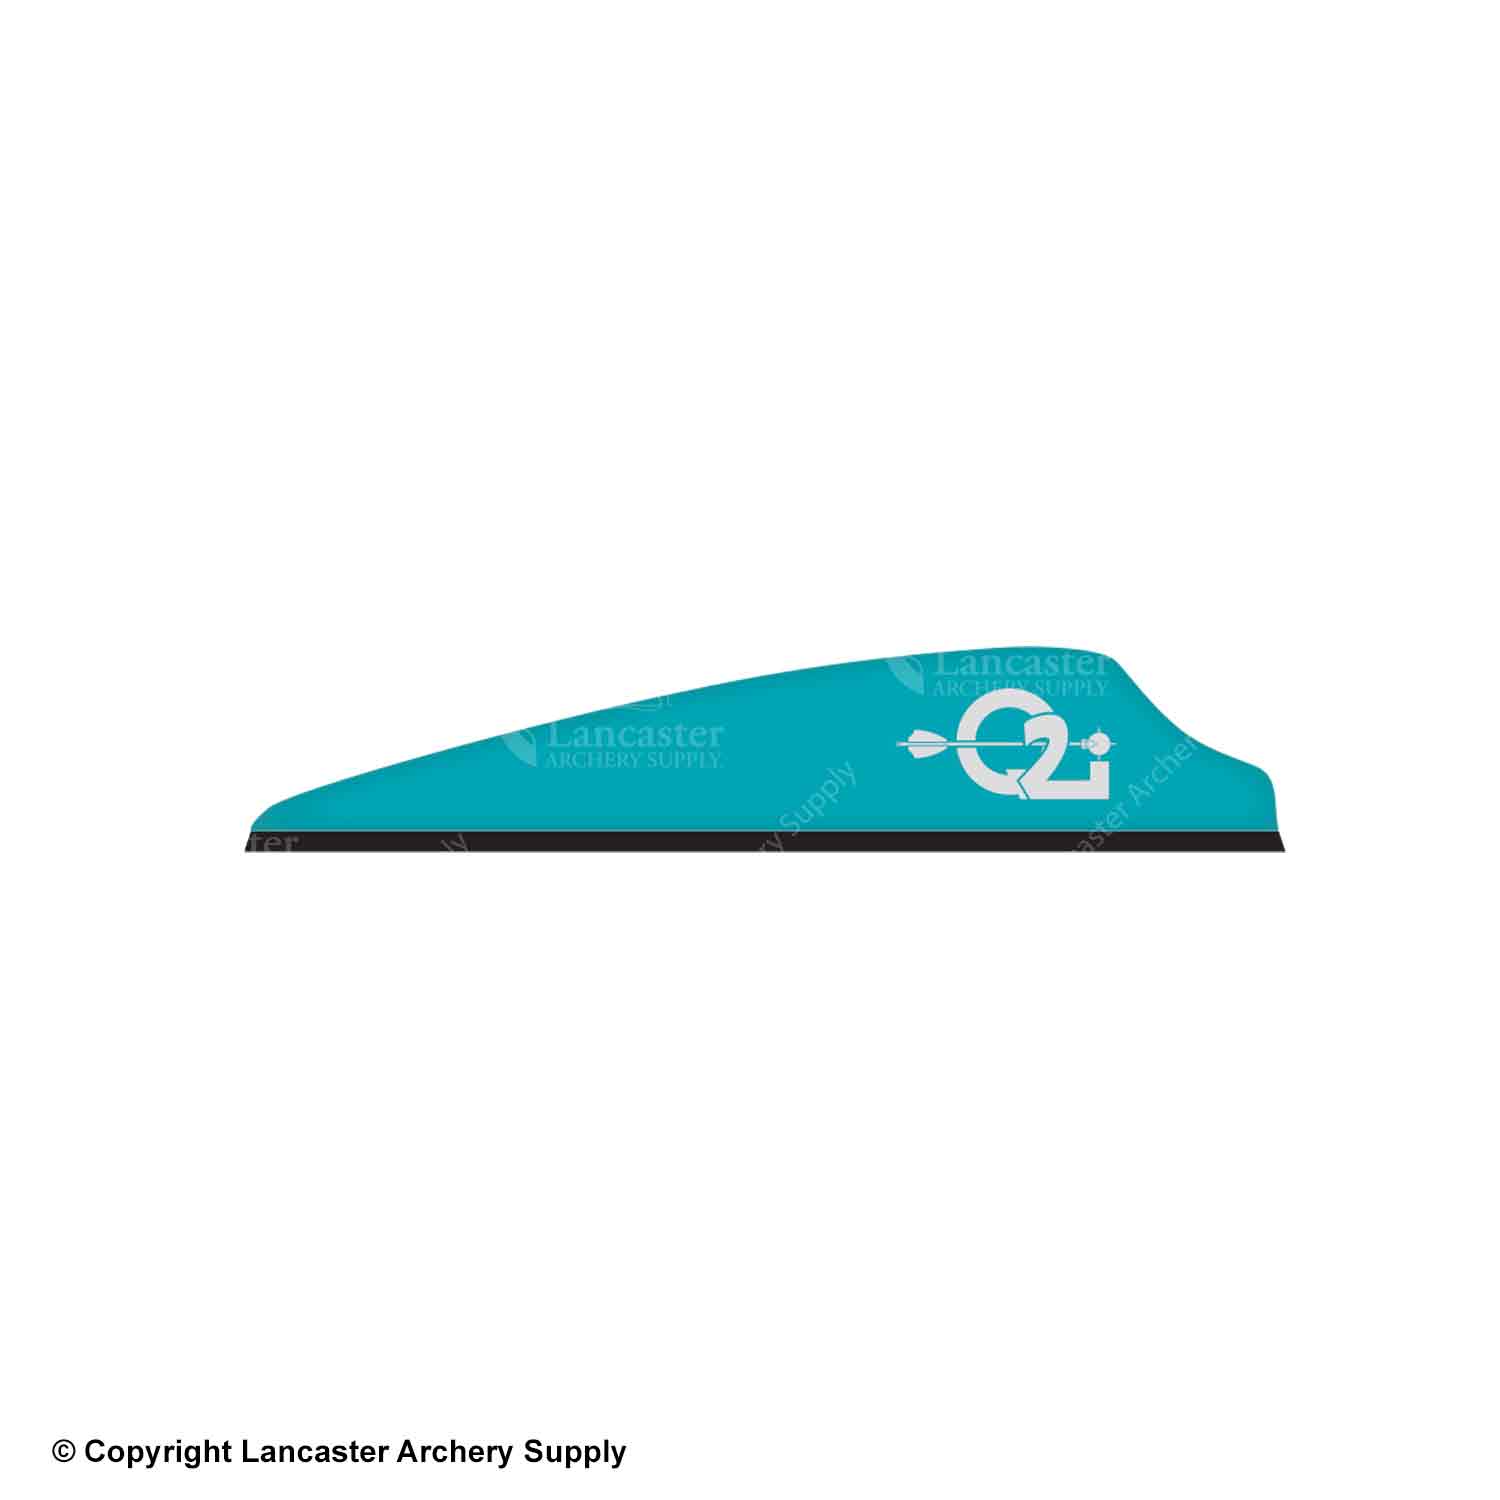 Shield cut vane that is teal, has a black base, and silver Q2i logo.